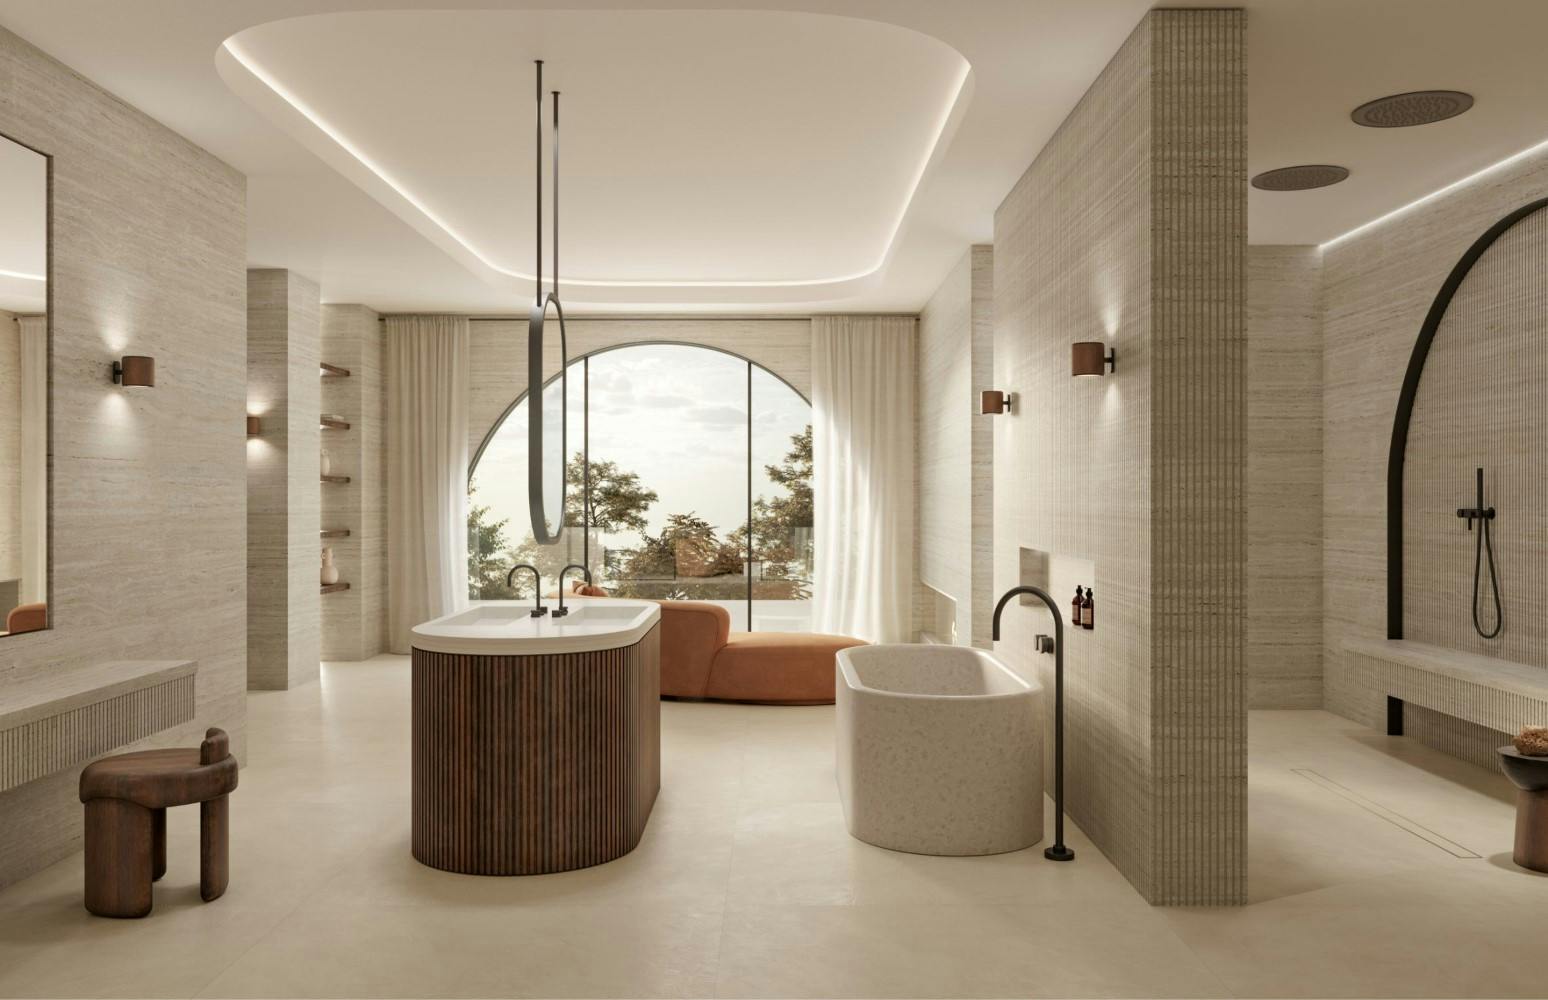 Numéro d'image 42 de la section actuelle de The Palazzo: the bathroom designed by Remy Meijers in which the shower takes centre stage de Cosentino Canada